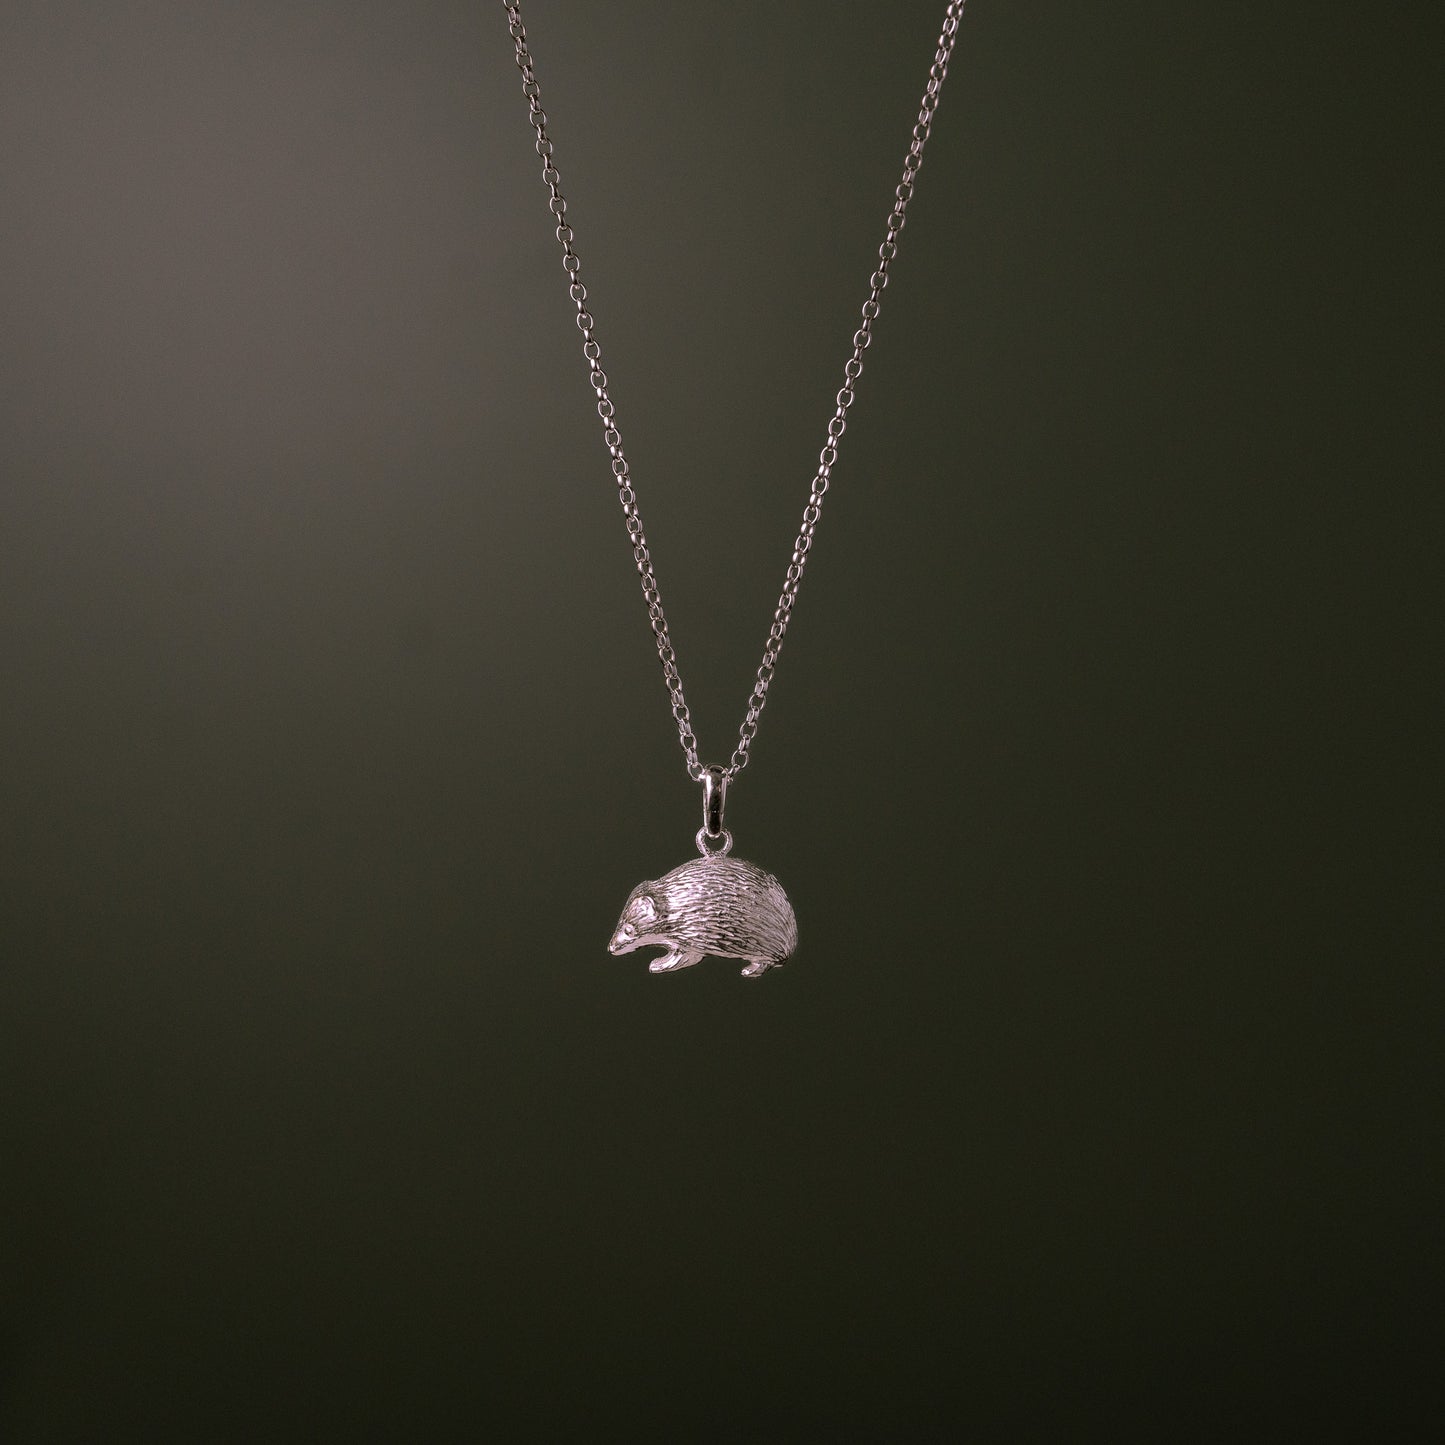 Hedgehog Small Silver Charm Necklace